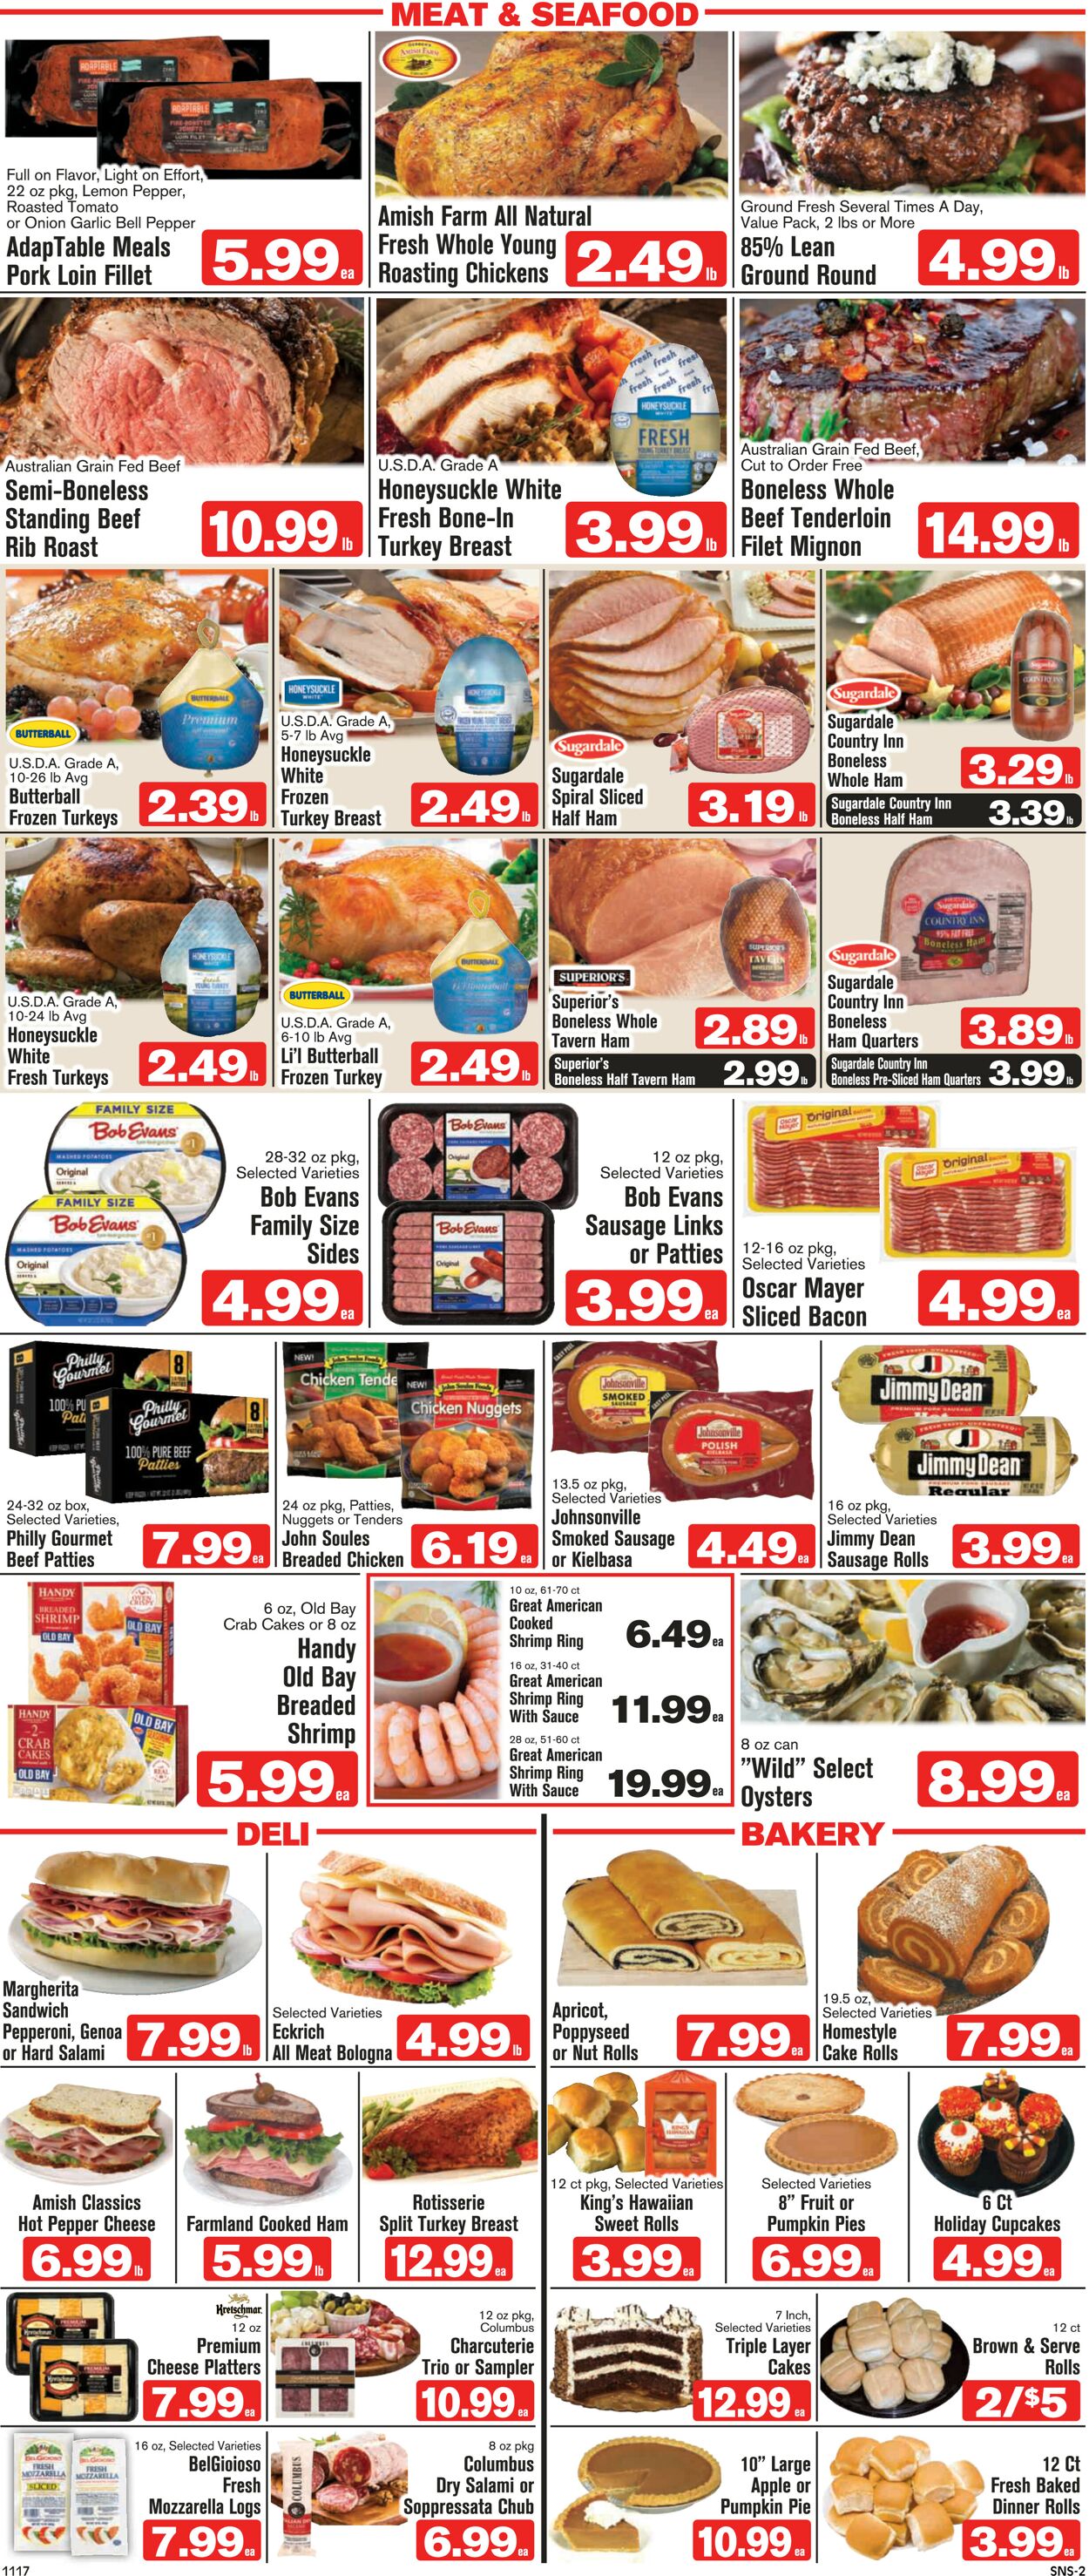 Shop ‘n Save Ad from 11/17/2022